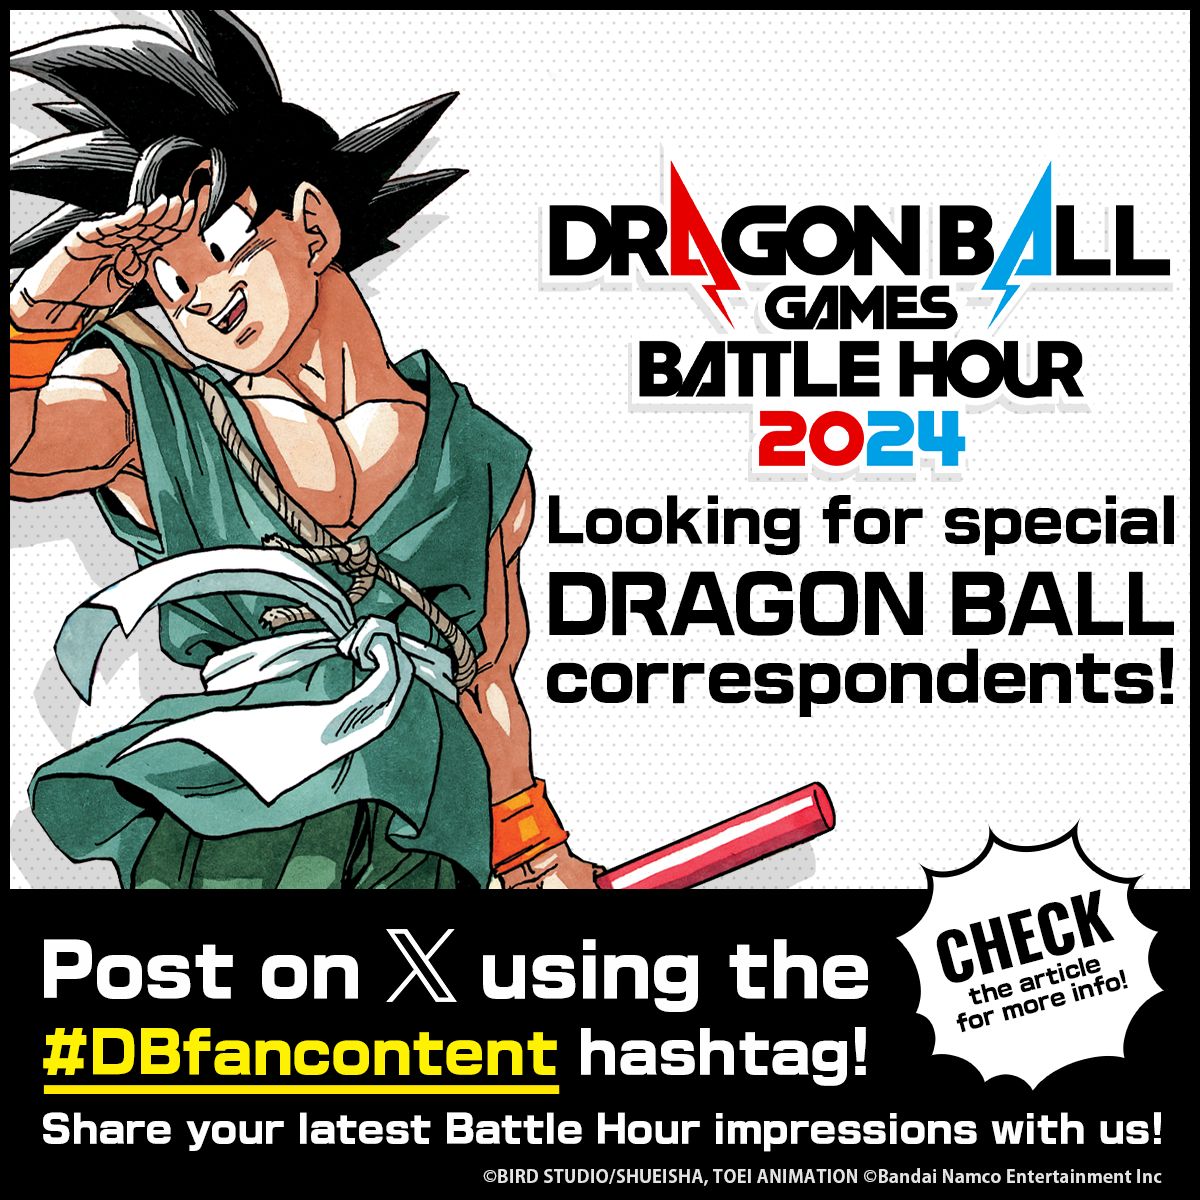 We're looking for special correspondents for DRAGON BALL Games Battle Hour 2024! All you need to do is post on X using the hashtag #DBfancontent!